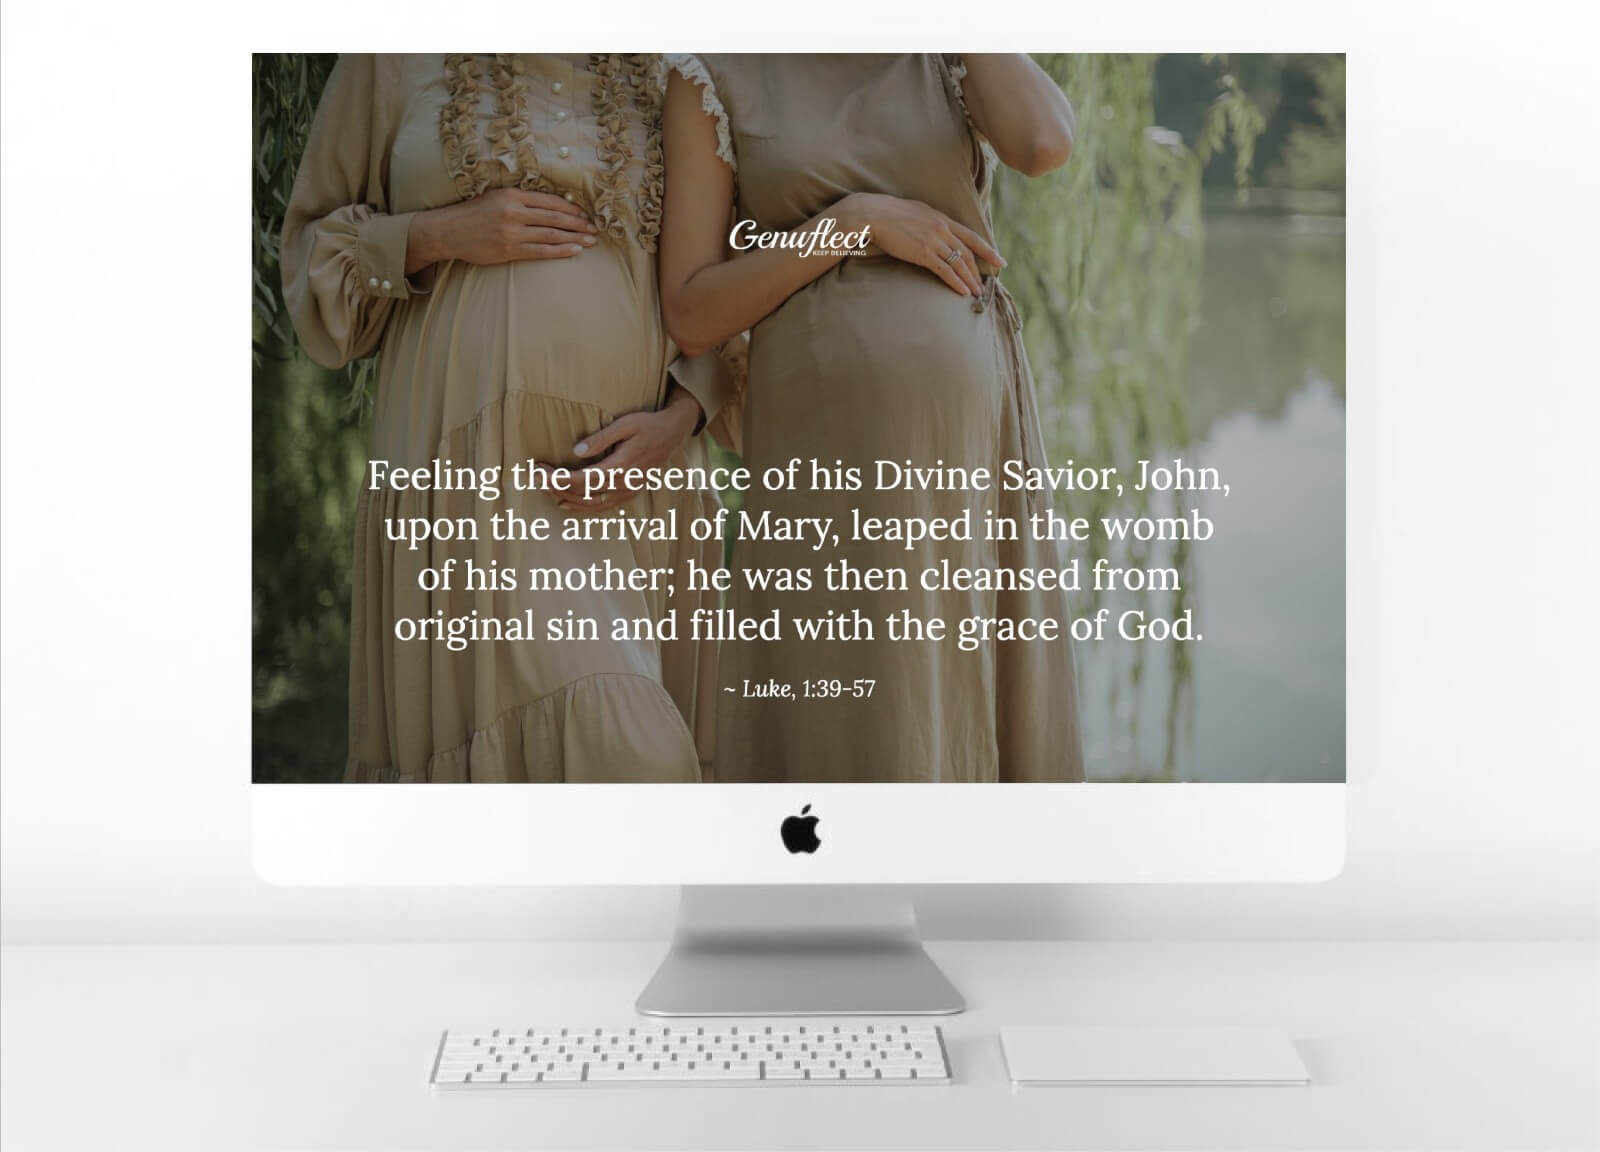 Genuflect image on computer background of Two pregnant women side by side with hands on their pregnant bellies